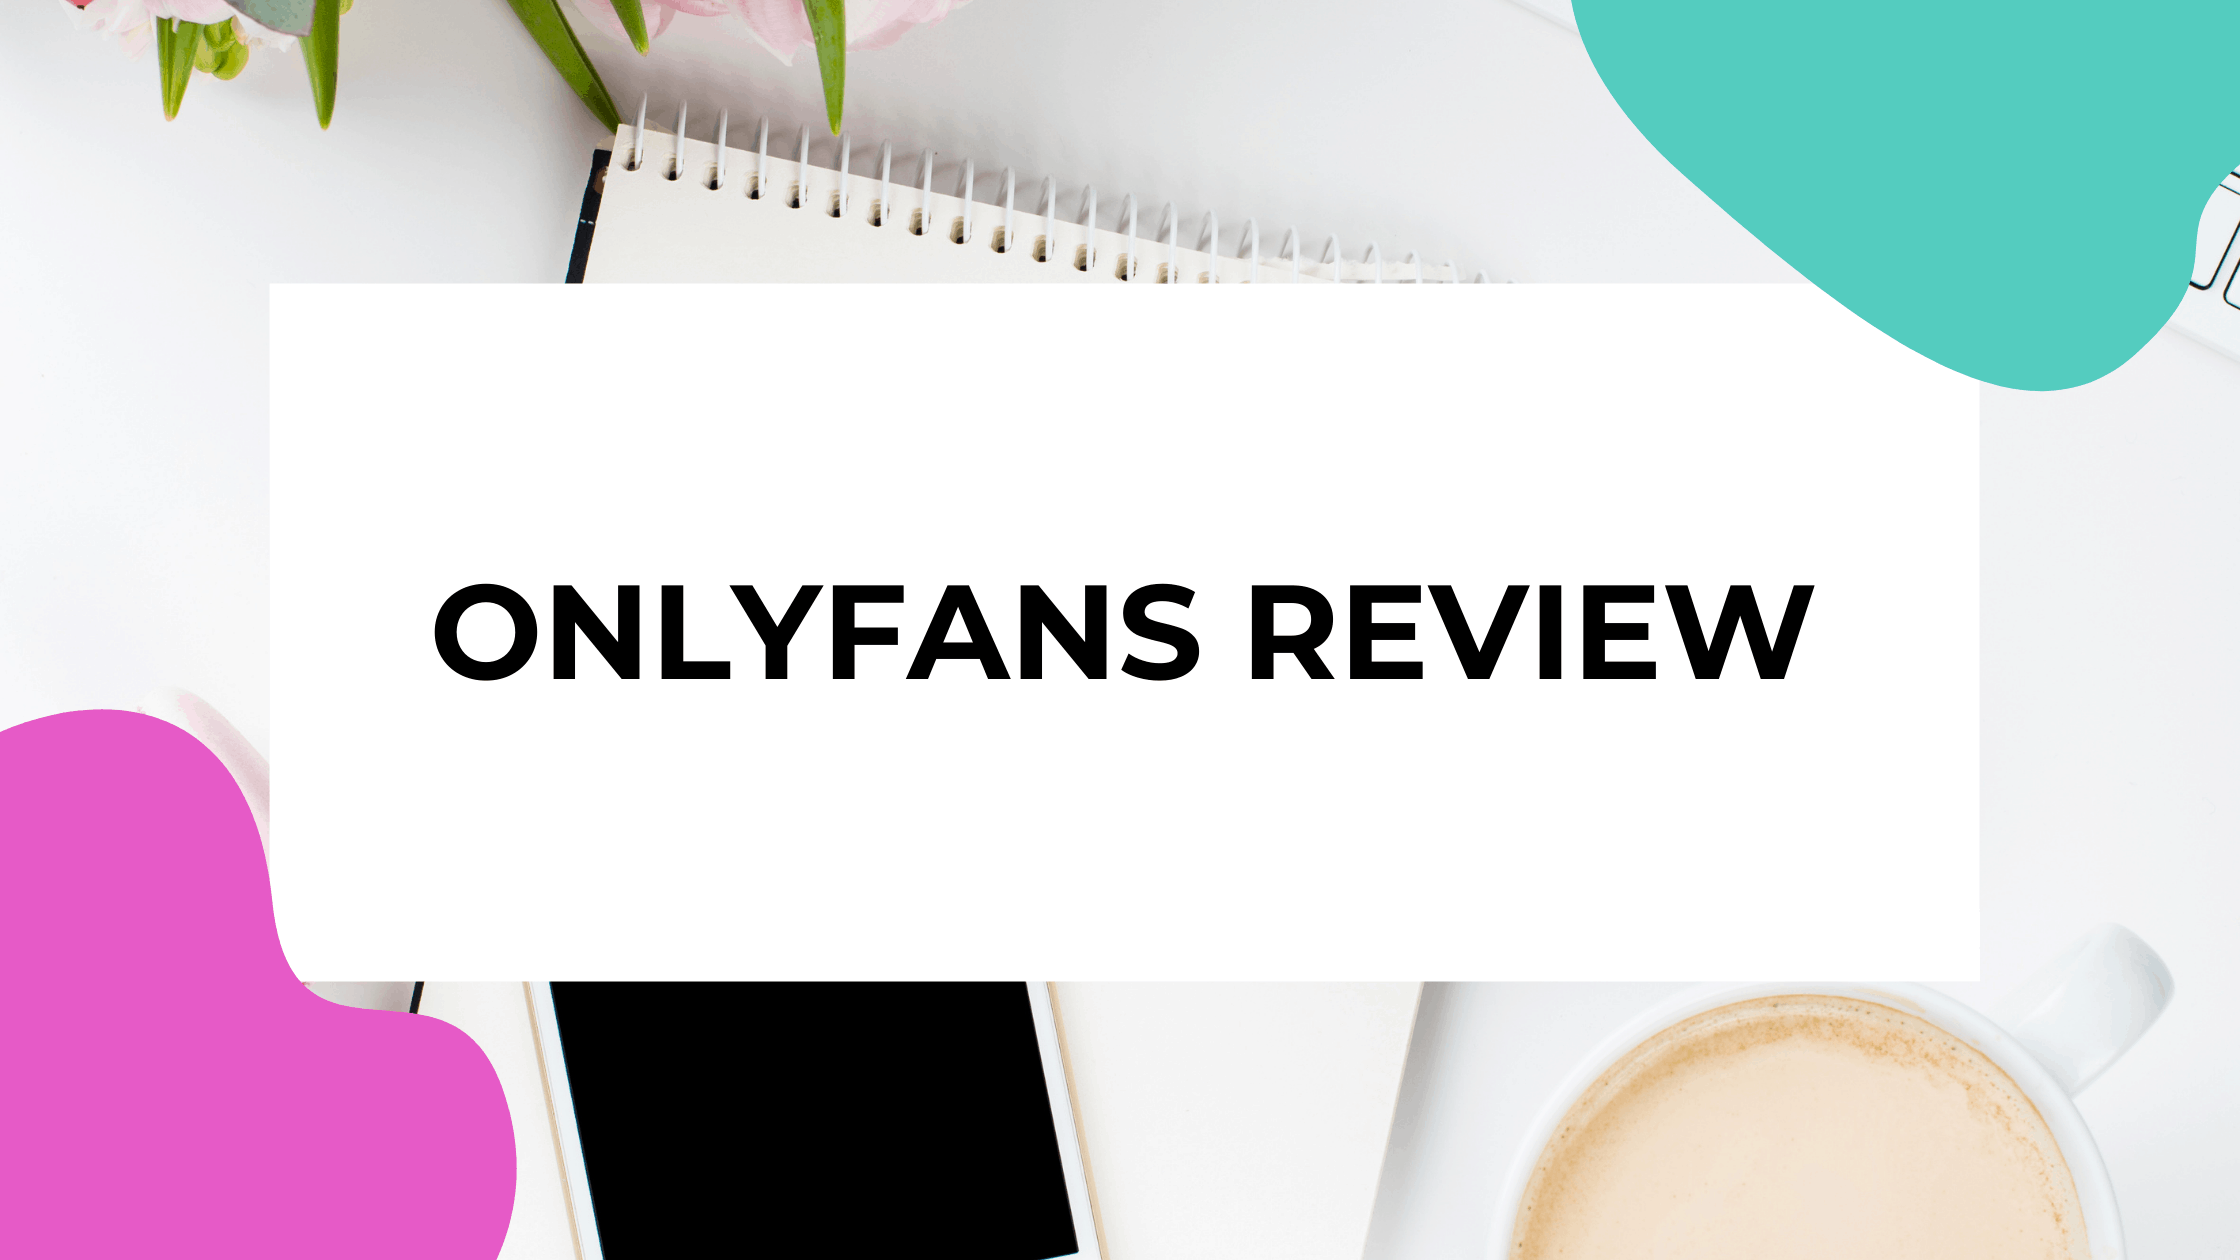 Only fans review